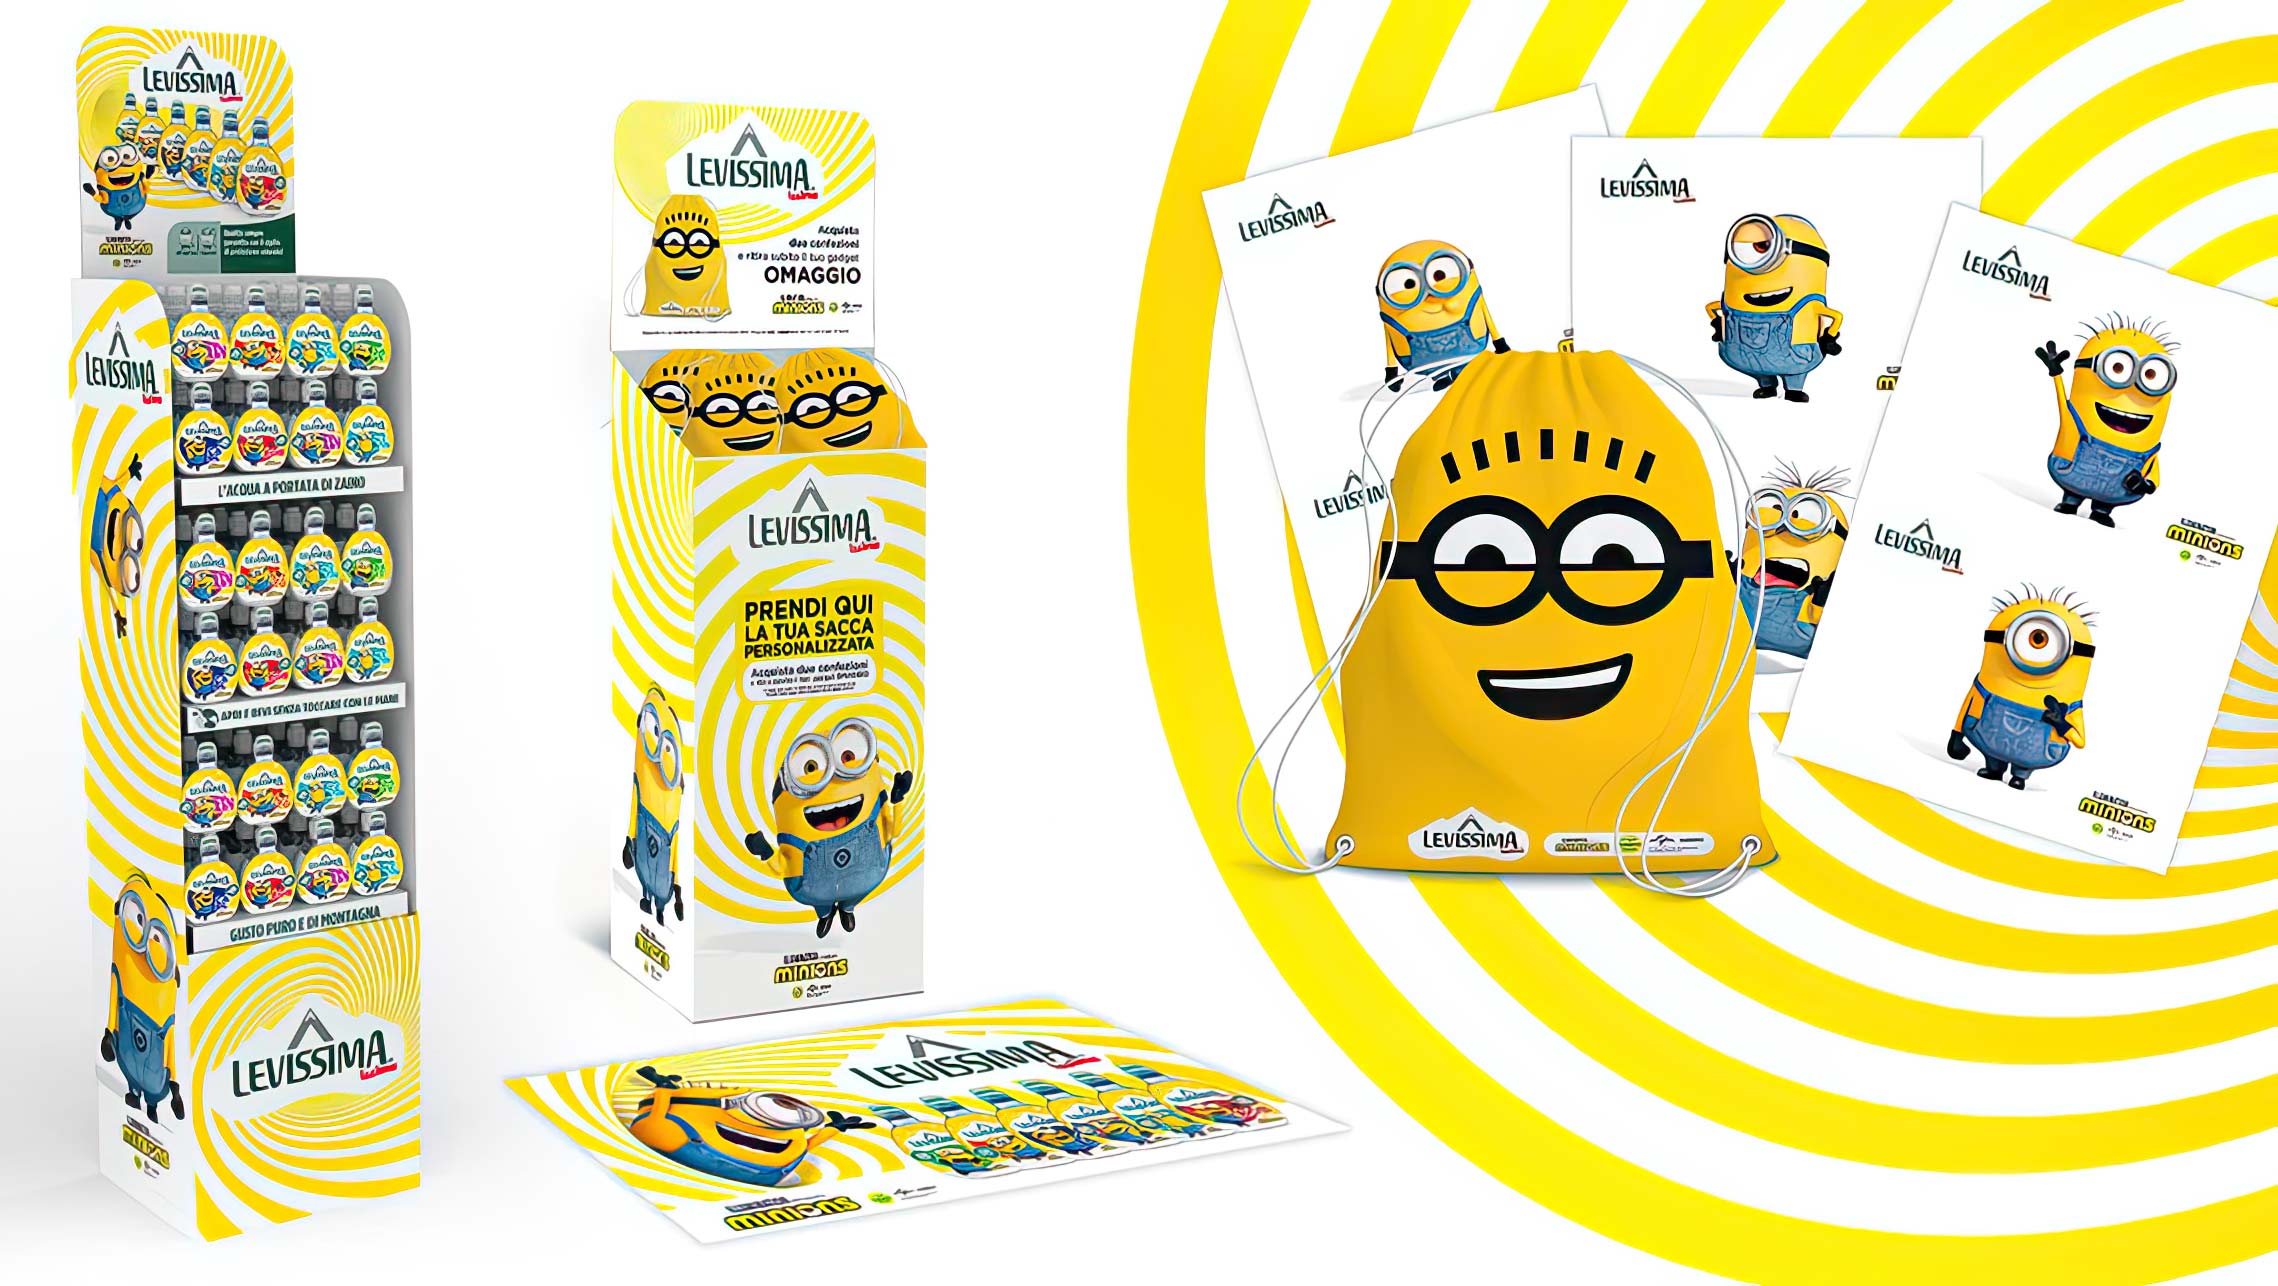 The standing display units for the Issima Minions bottles and its promotions